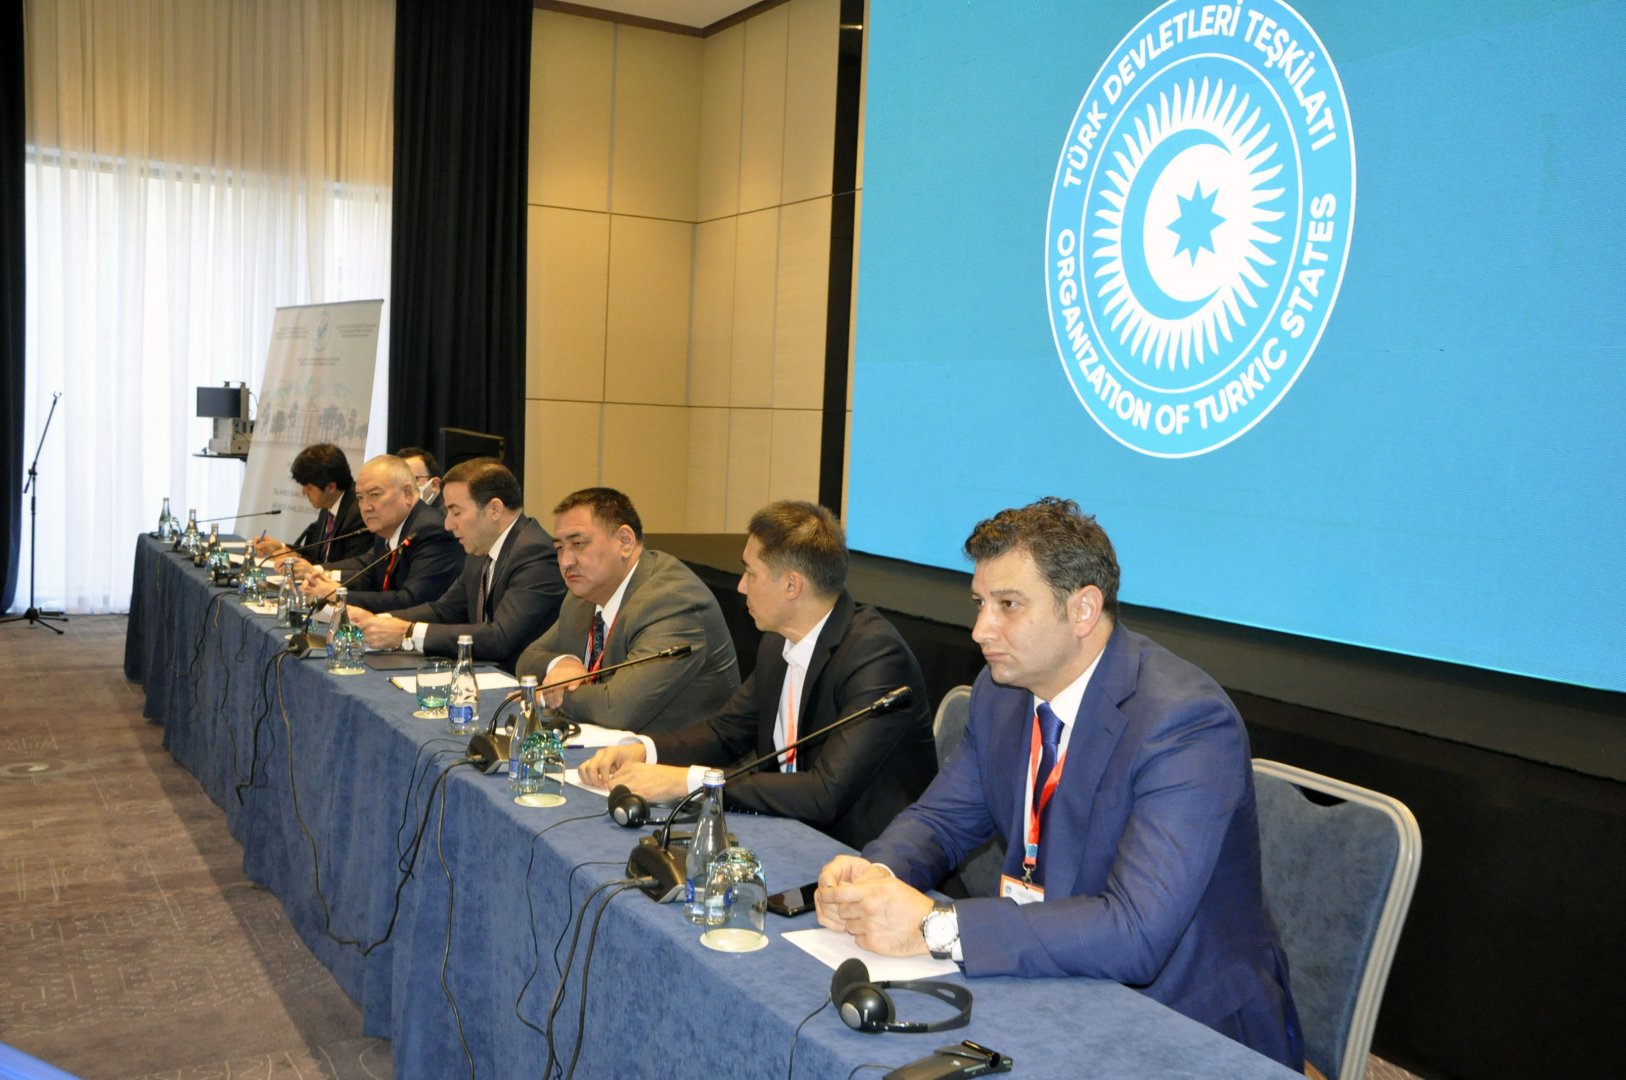 Observer Mission of Turkic States positively assesses holding and results of elections in Kyrgyzstan